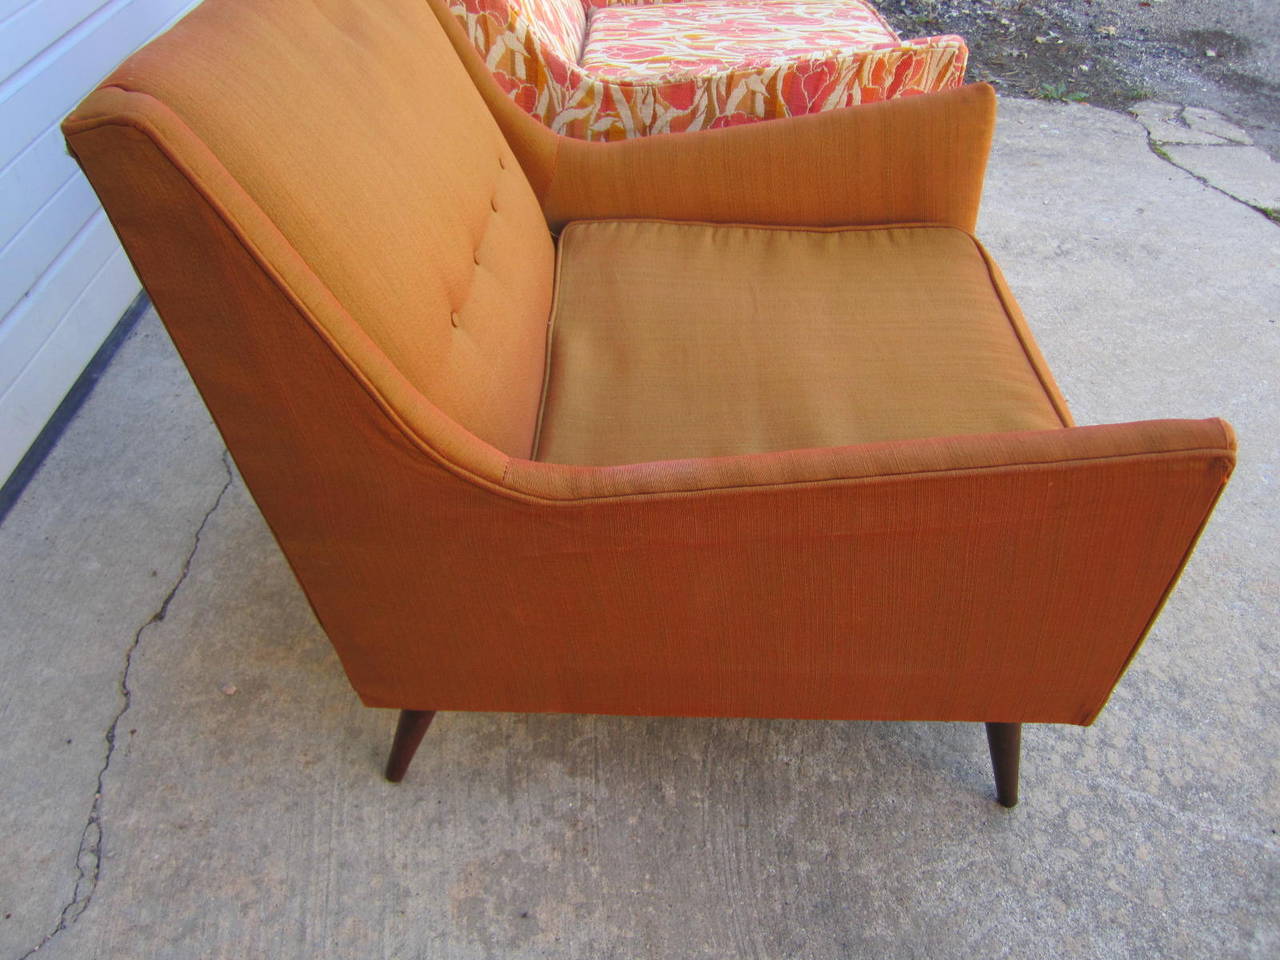 Lovely Pair of Milo Baughman Style Lounge Chairs and Ottoman In Good Condition For Sale In Pemberton, NJ